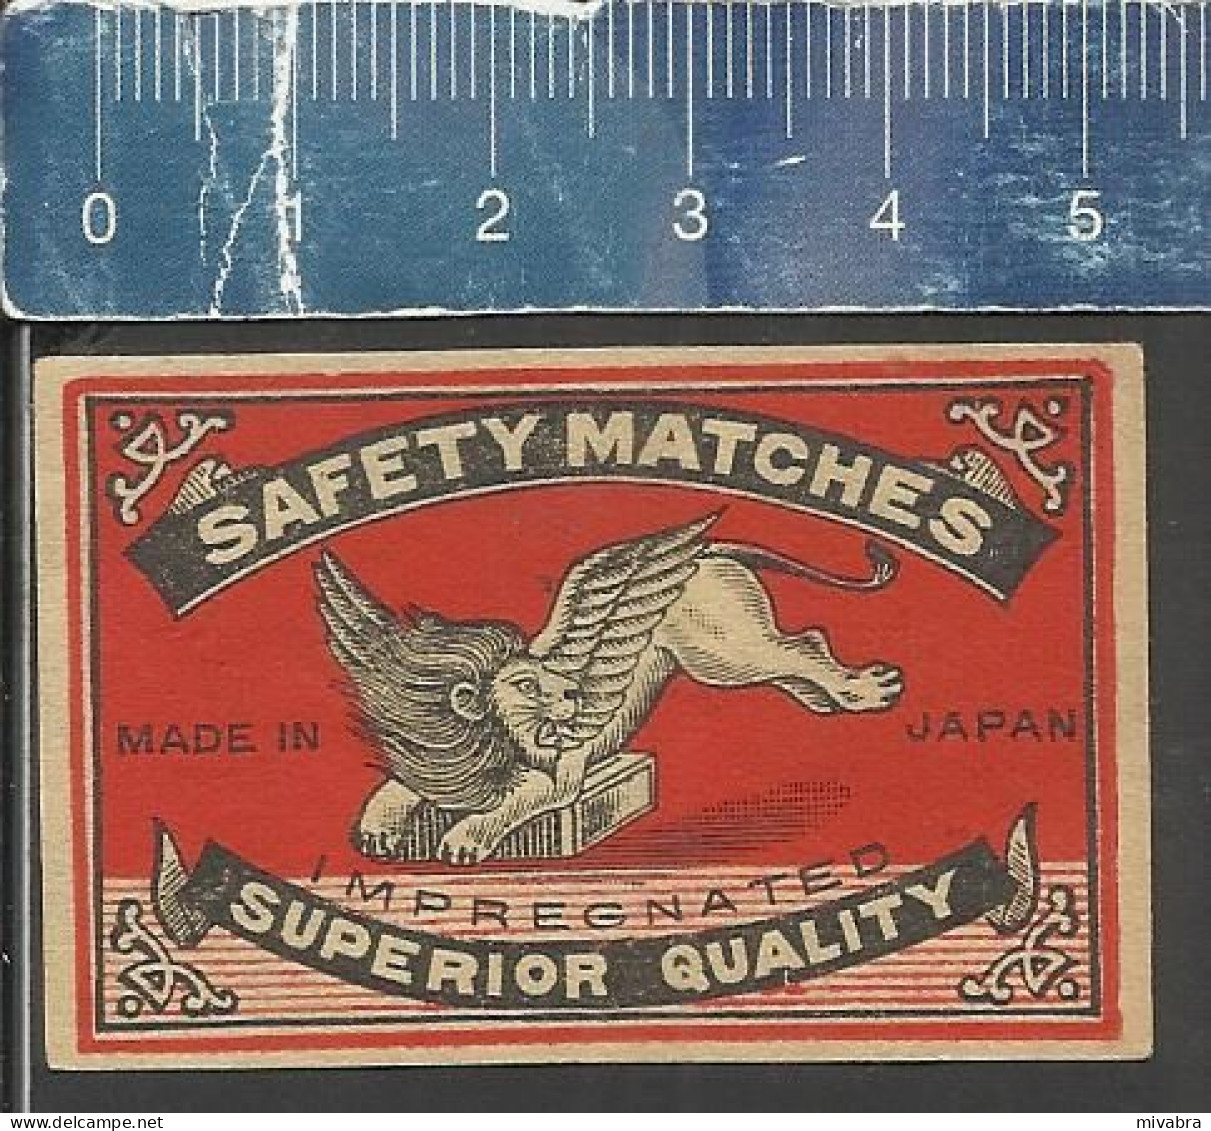 WINGED LION WITH WINGS SAFETY MATCHES IMPREGNATED SUPERIOR QUALITY - OLD VINTAGE MATCHBOX LABEL MADE JAPAN - Boites D'allumettes - Etiquettes